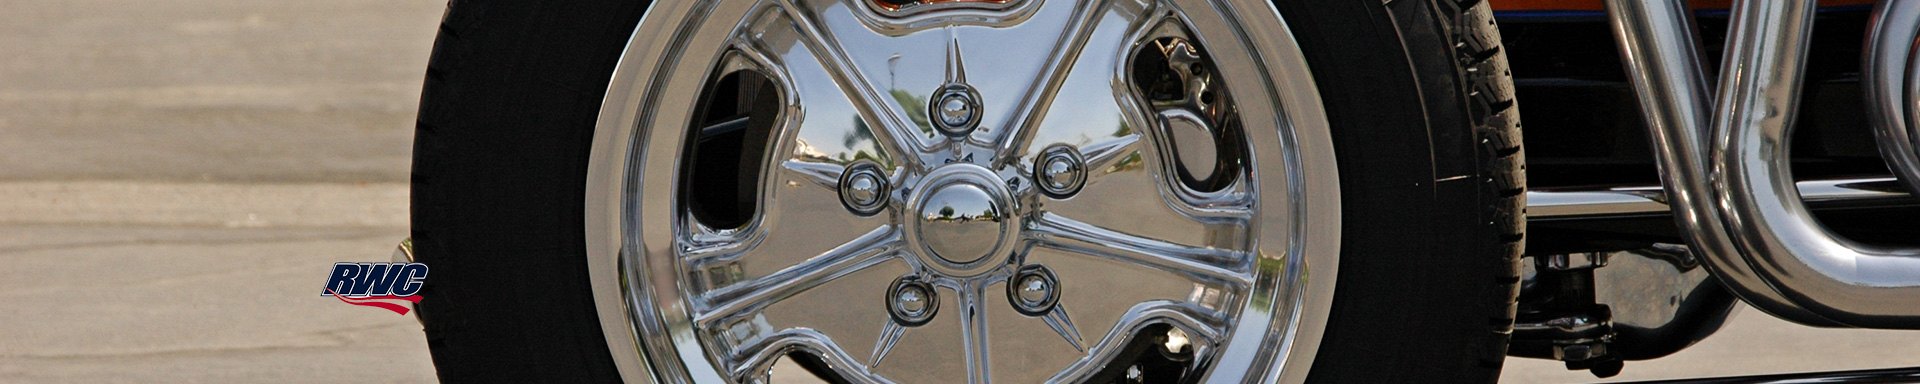 RealWheels Trailer Hitches